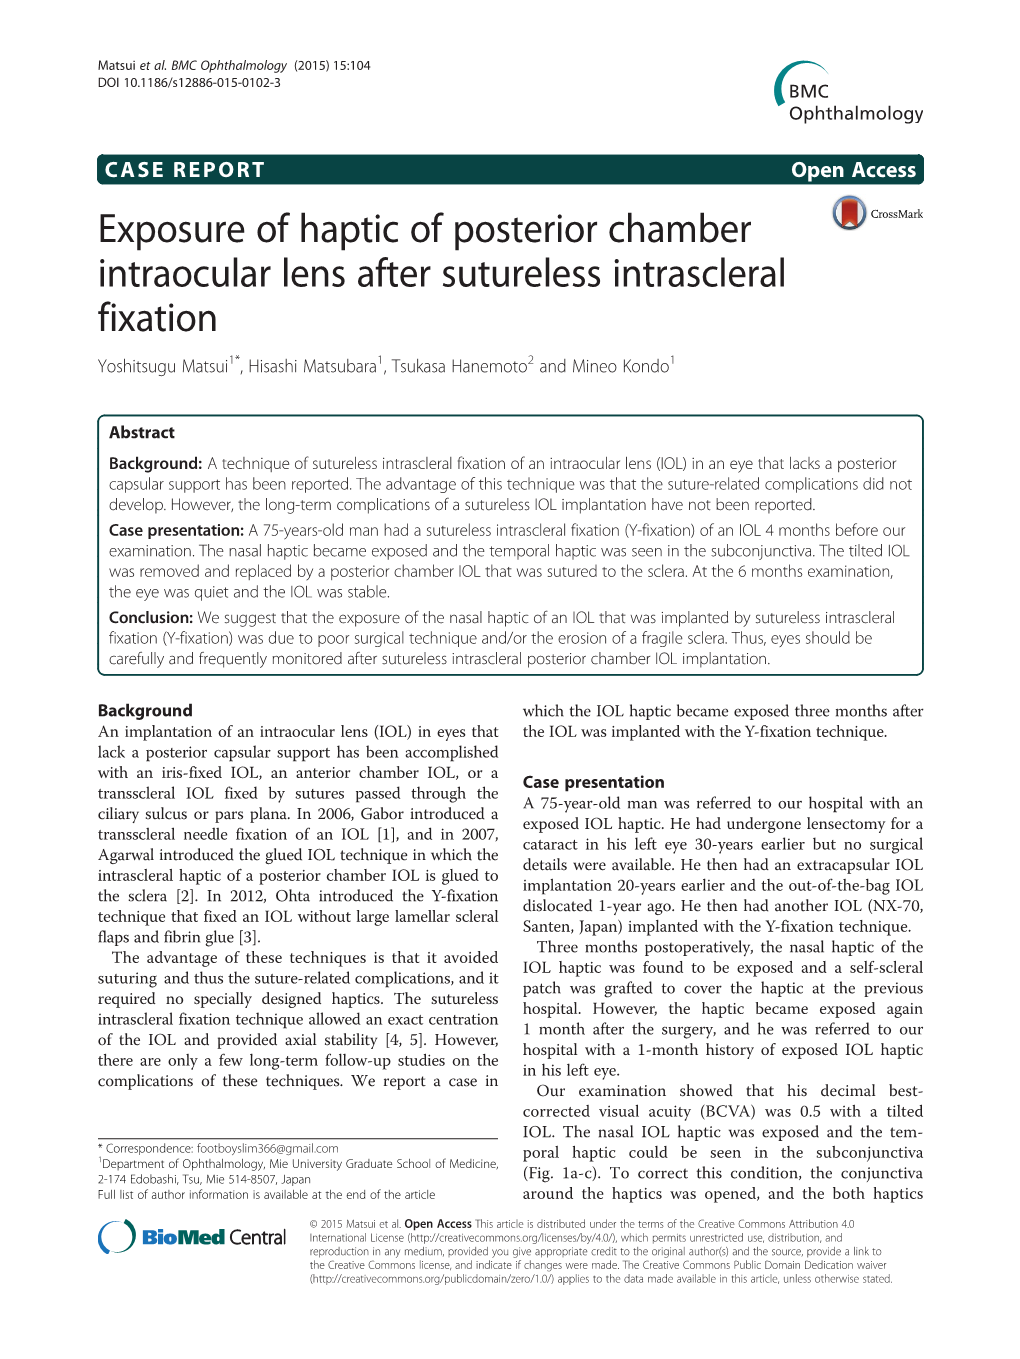 Exposure of Haptic of Posterior Chamber Intraocular Lens After